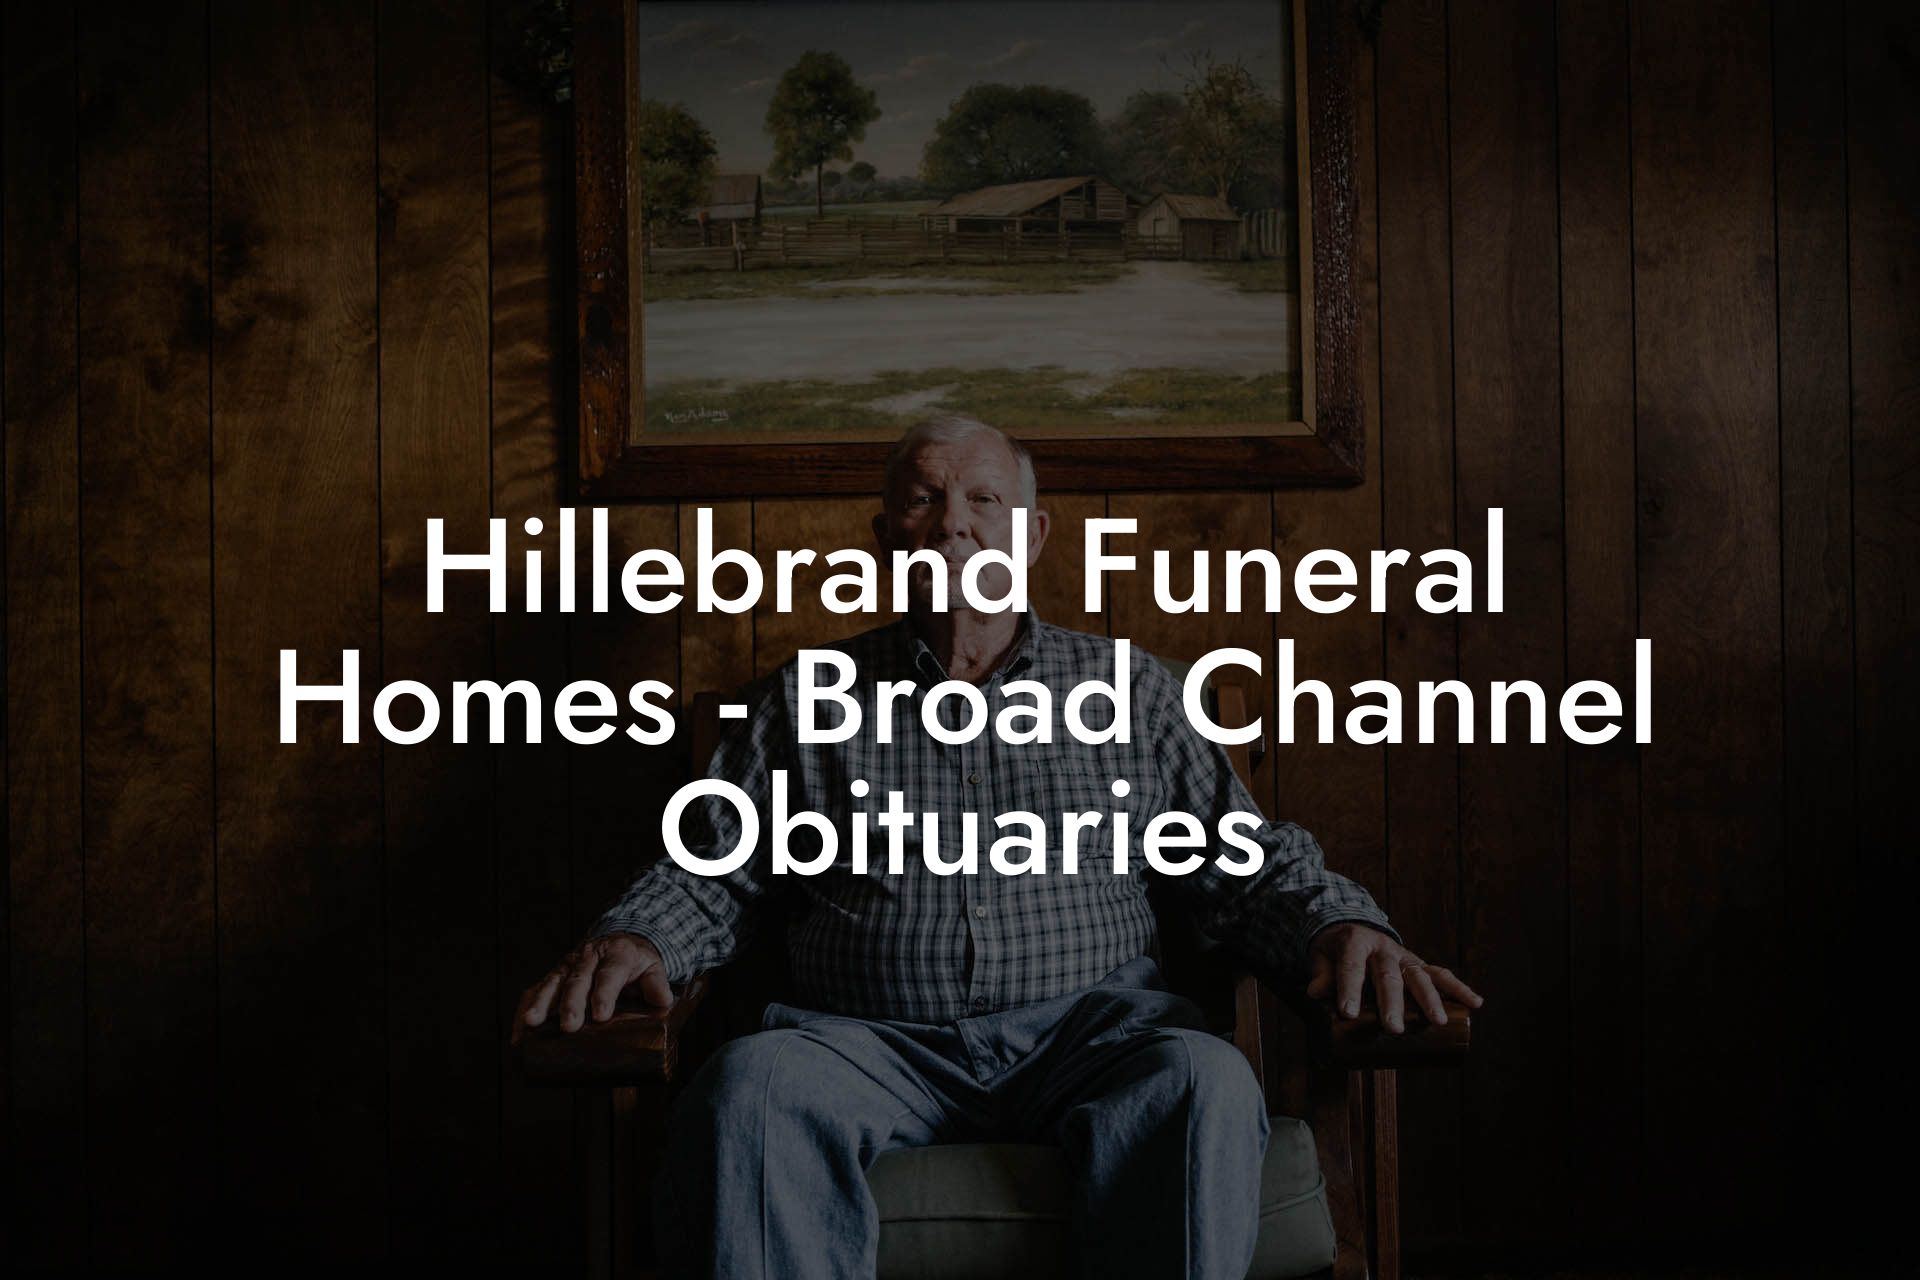 Hillebrand Funeral Homes - Broad Channel Obituaries